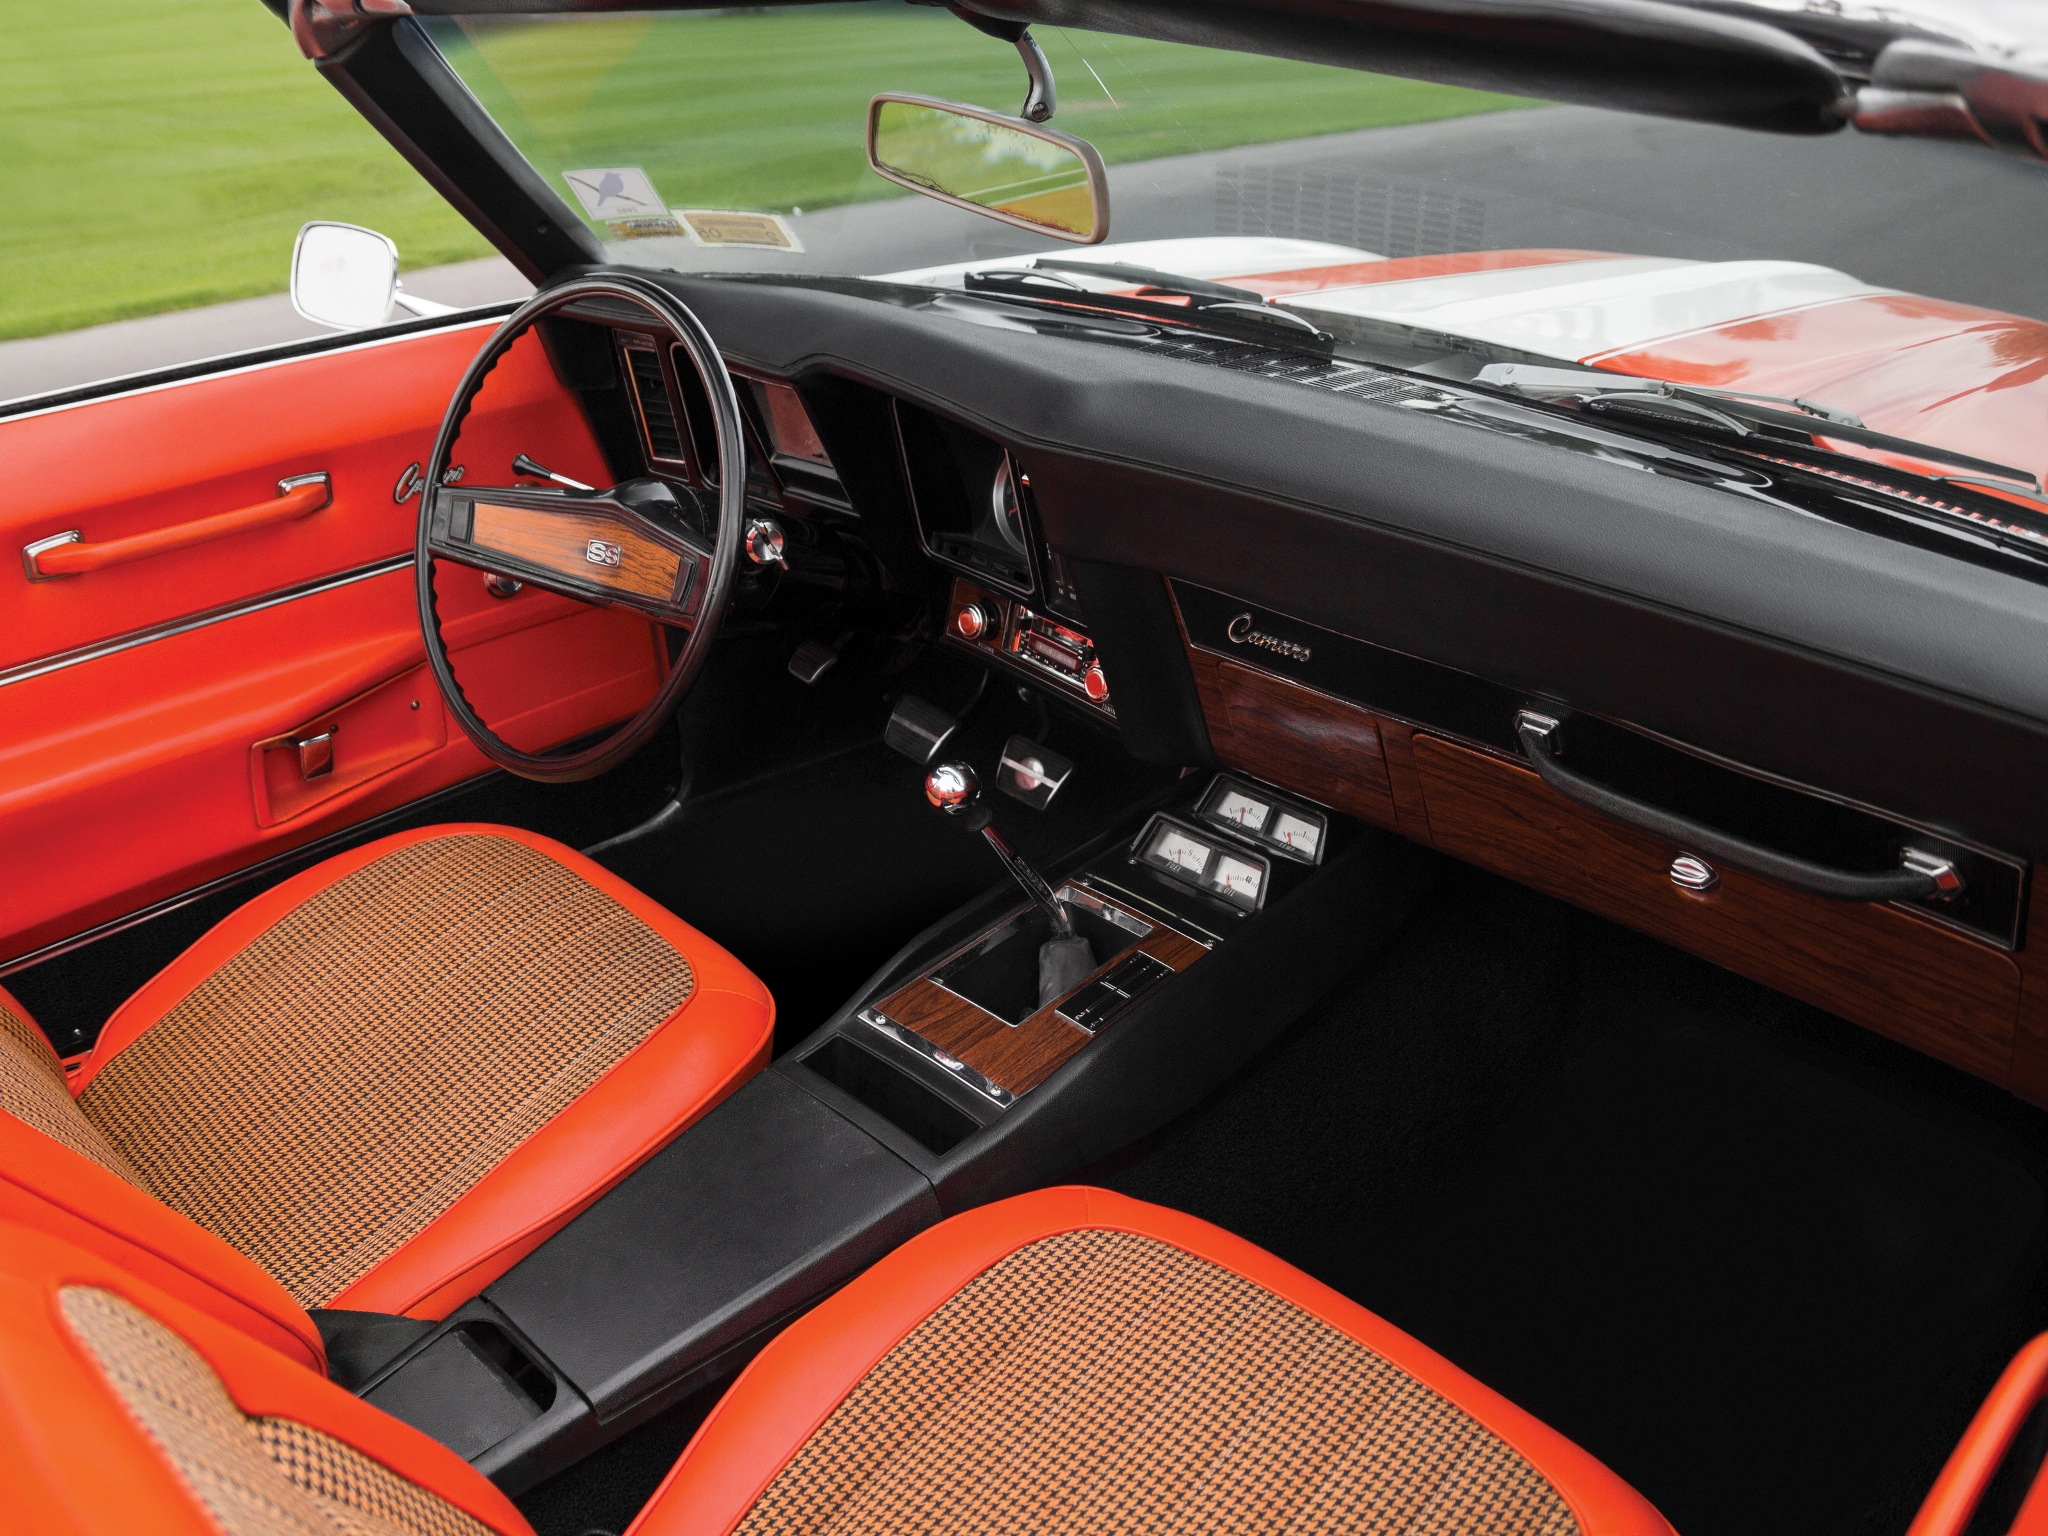 1969, Chevrolet, Camaro, Rs ss, 396, Z11, Convertible, Indy, 500, Pace, Classic, Muscle, R s, S s, Race, Racing, Interior Wallpaper